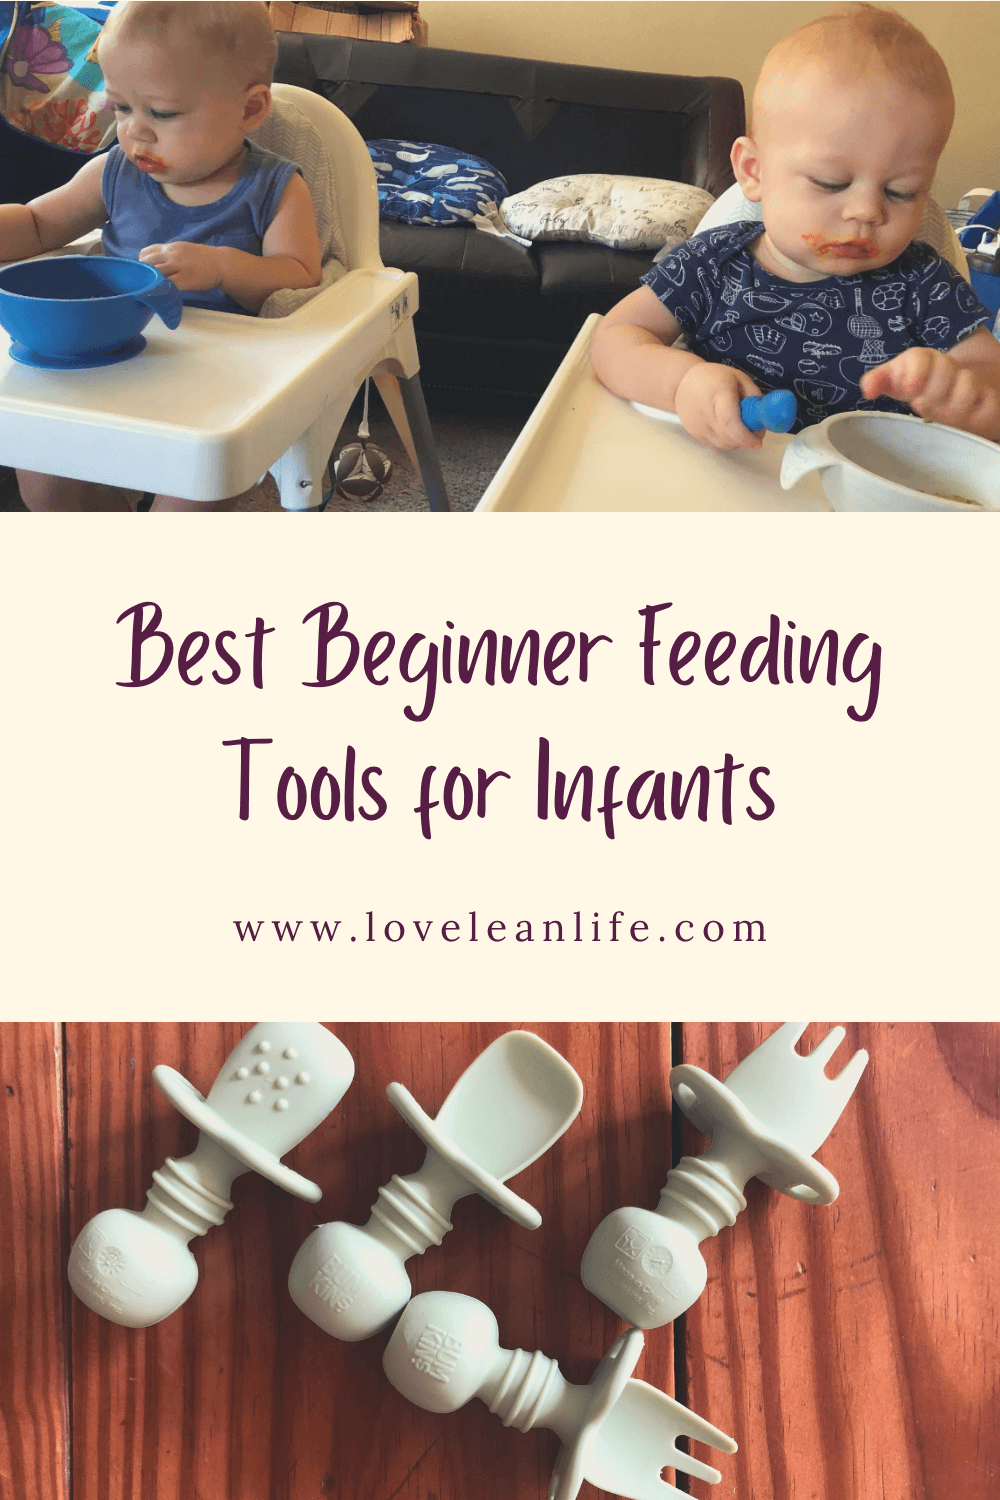 The most important baby feeding tools